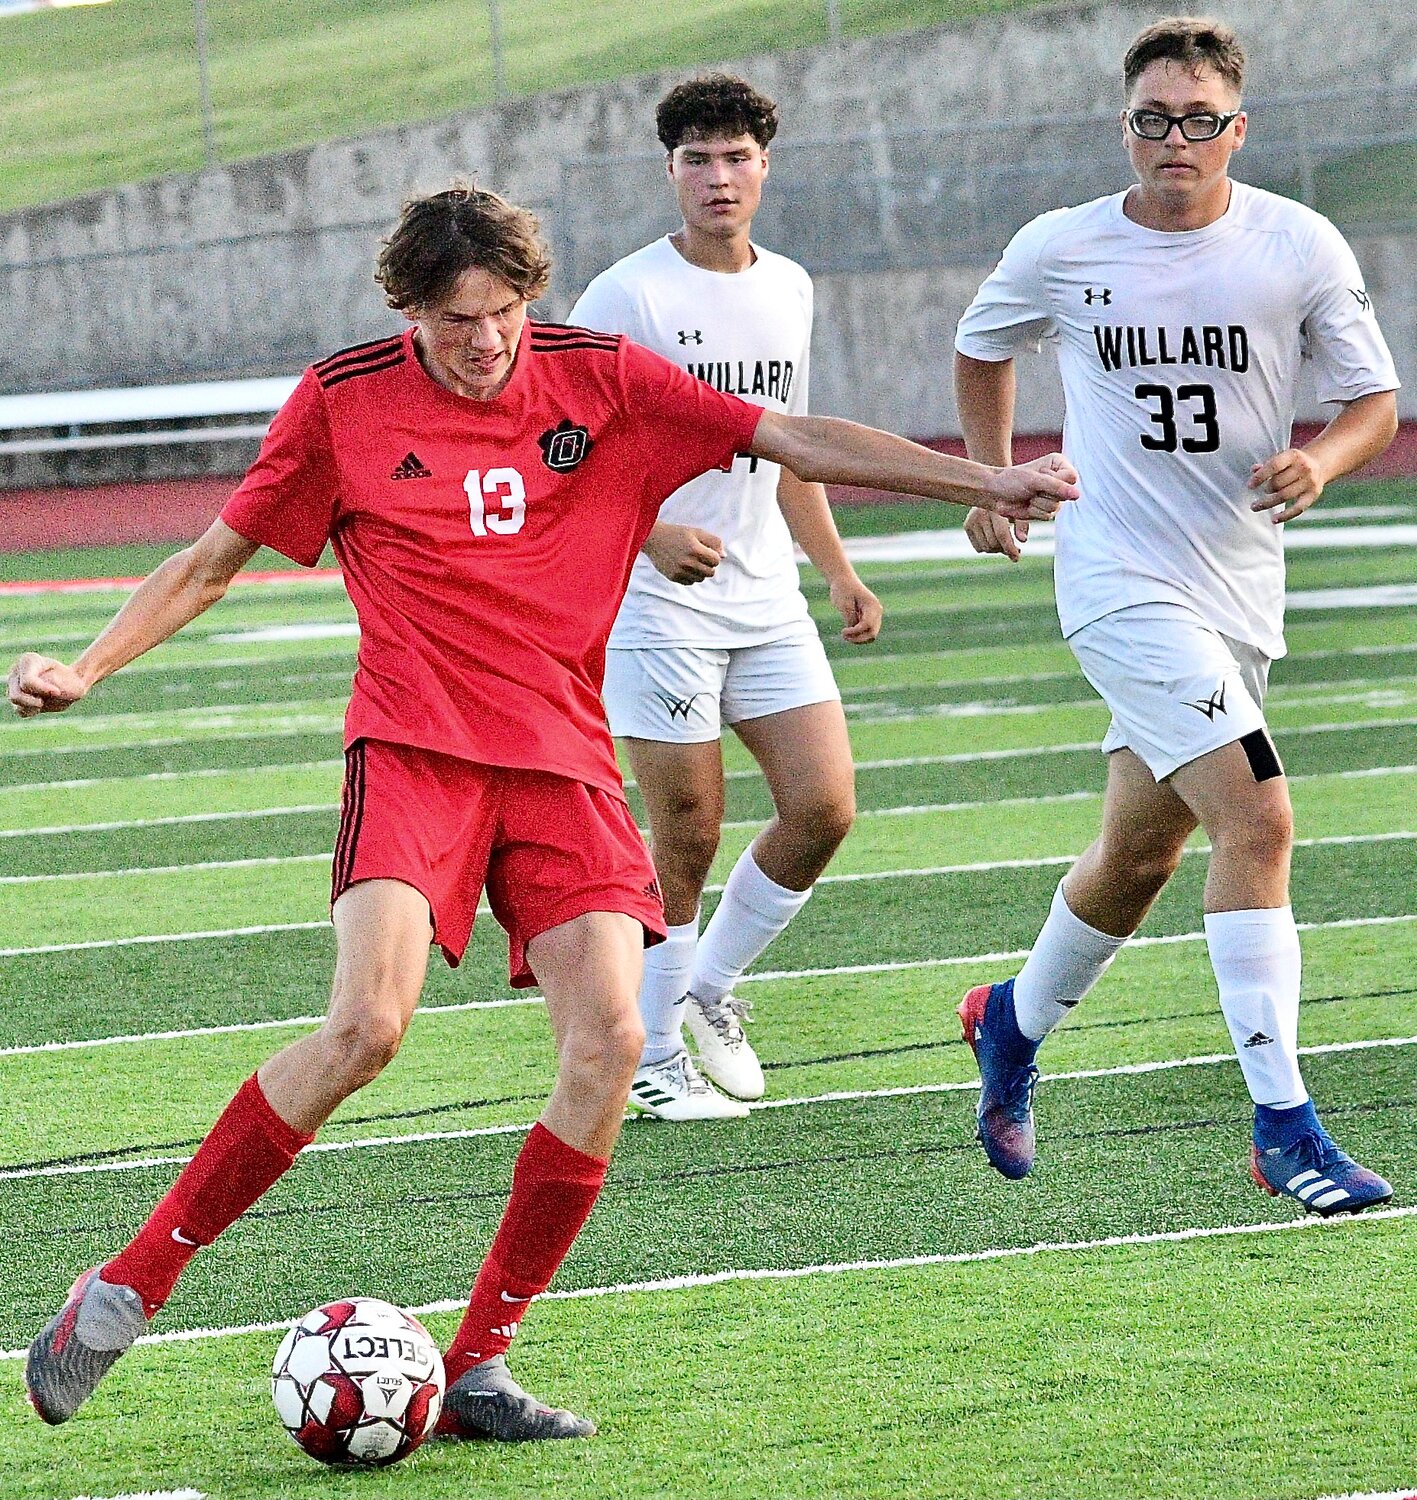 OZARK'S GRANT OGLE shoots for one of his three goals.